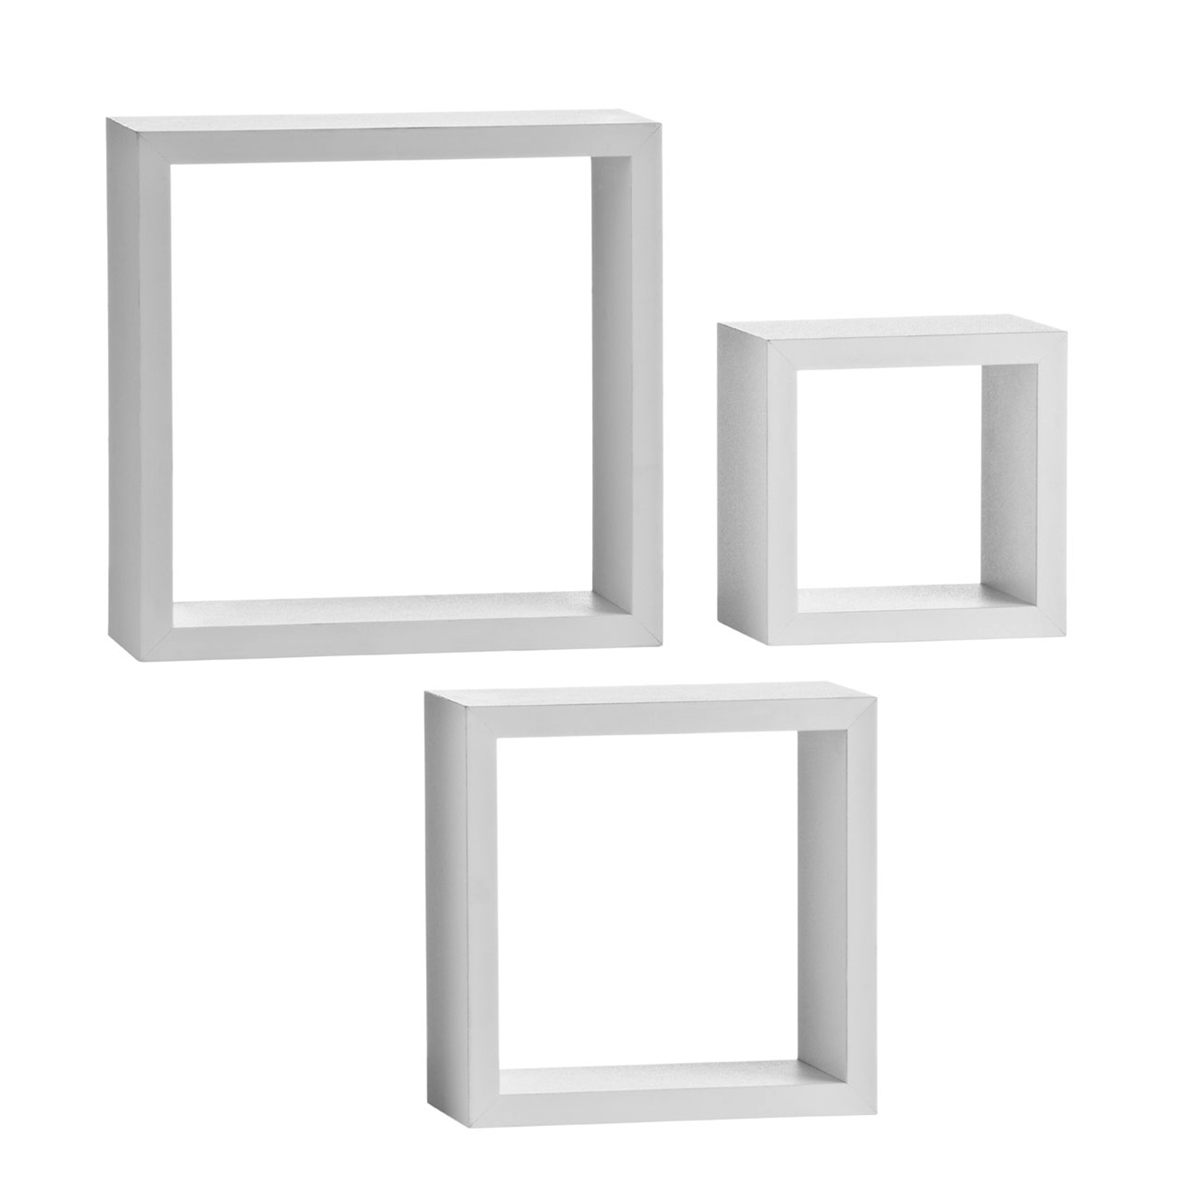 Accents Set of 3 white wall cubes